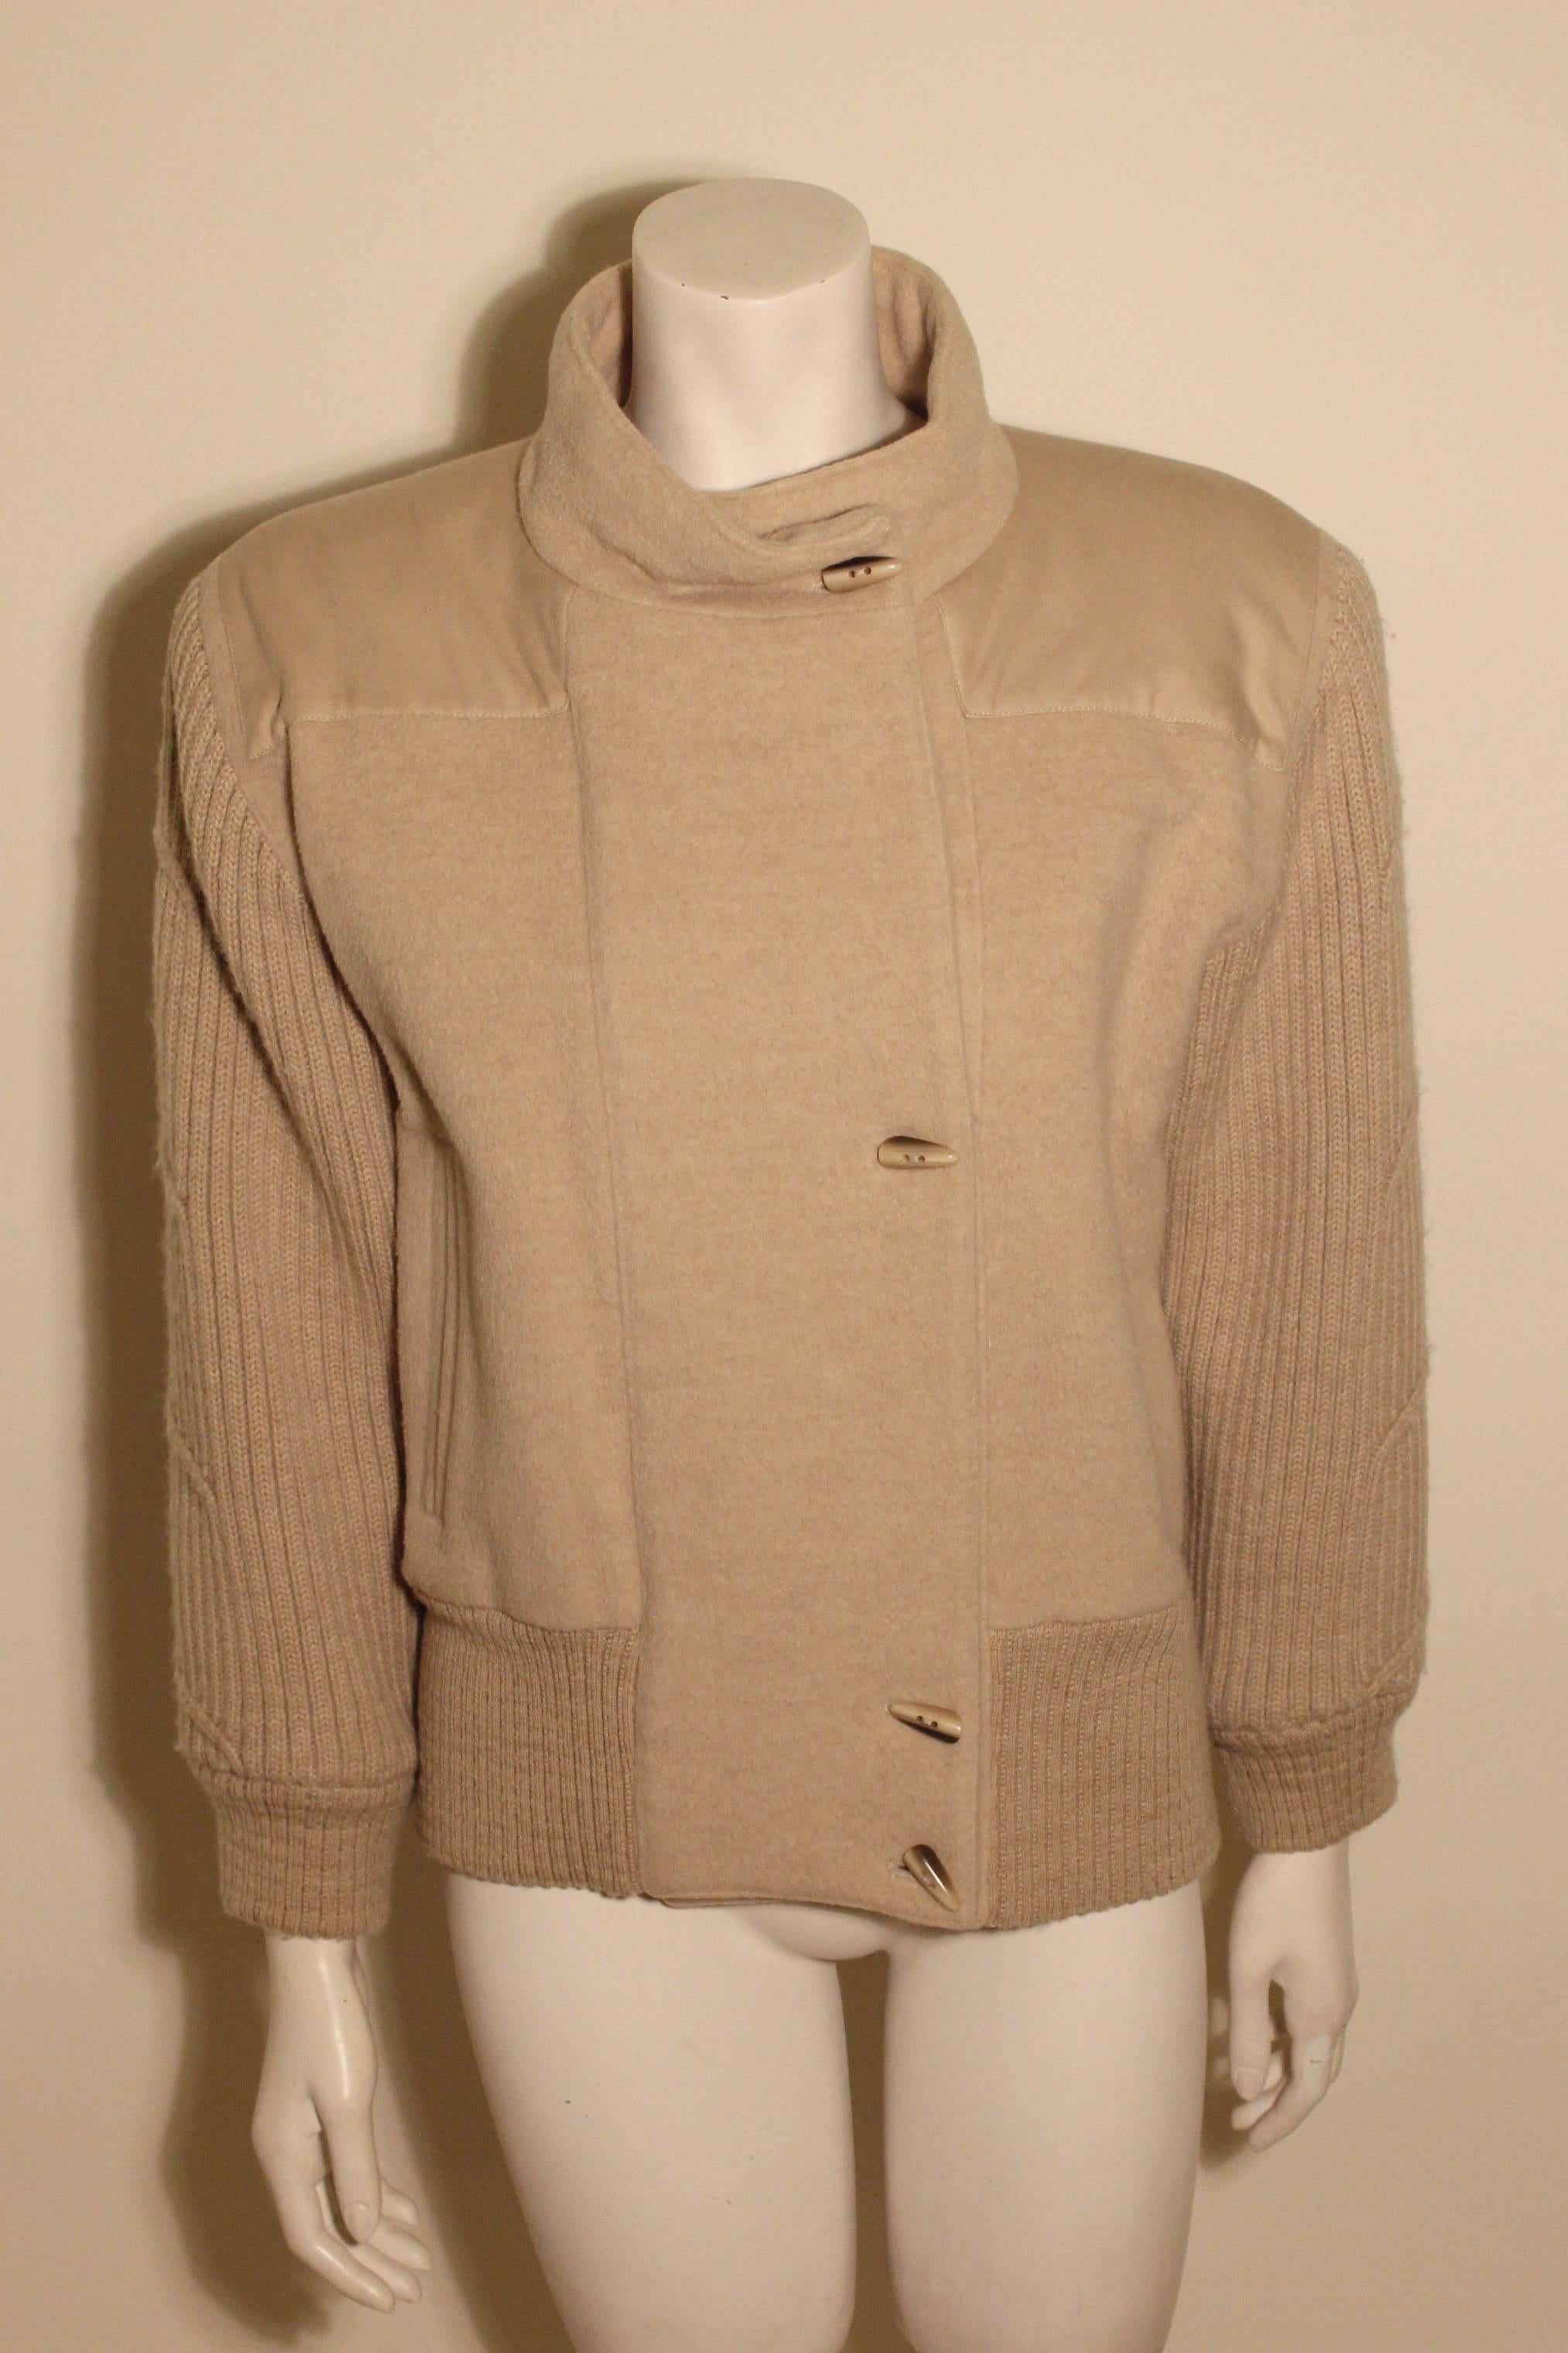 This camel hair Claude Montana jacket is strong on style. It has nice details with a high neck, a cotton yoke, and heavy ribbed sleeved and waist. It has toggles to close the front and two slash pockets. 